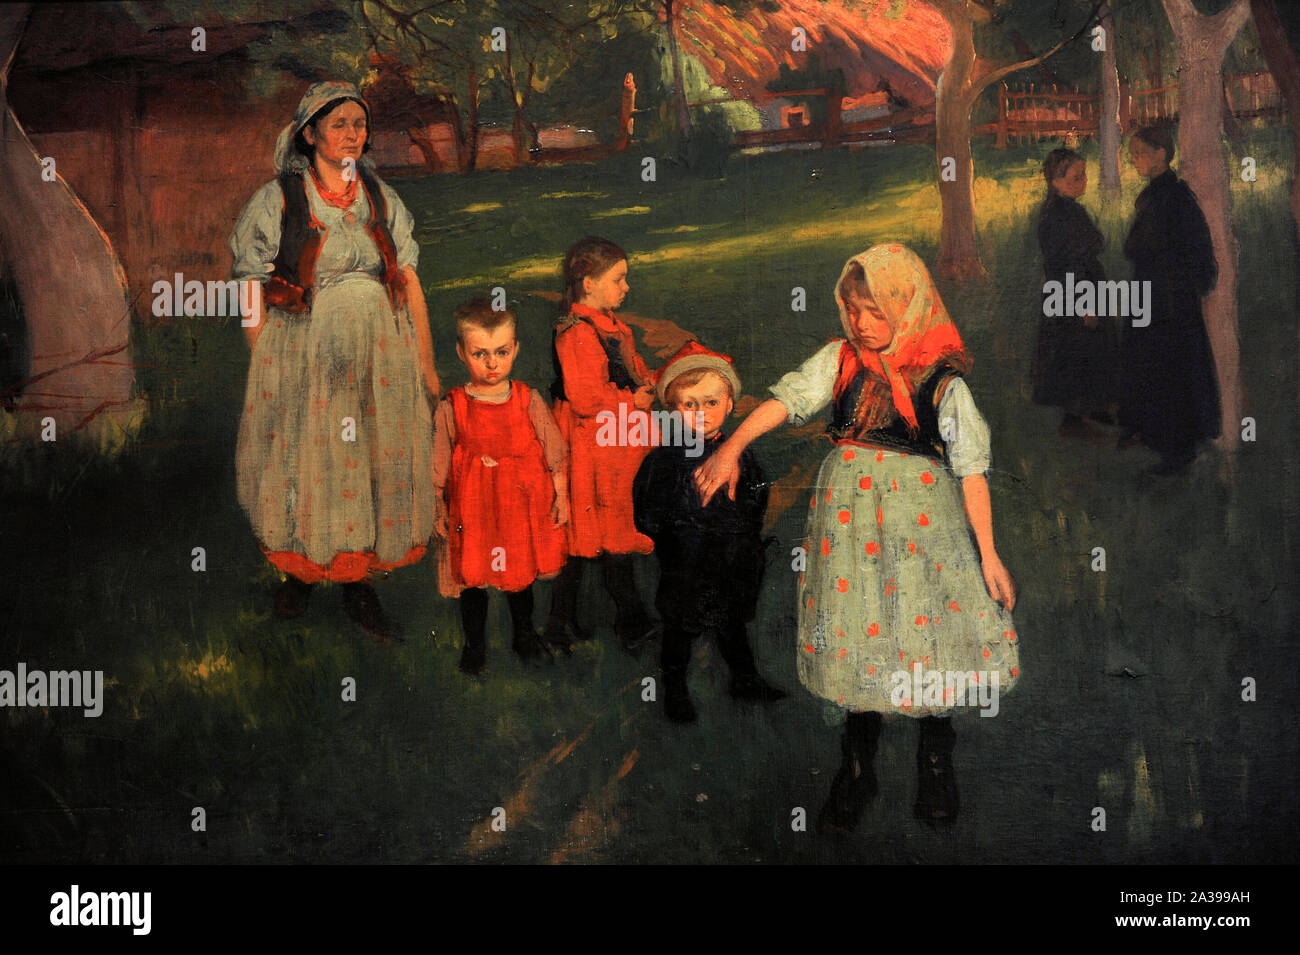 Wlodzimierz Tetmajer (1862-1923). The Offspring (Artist's family), 1905. Oil on canvas, 72 x 136 cm. Museum of Contemporary Art. Krakow, Poland. Stock Photo